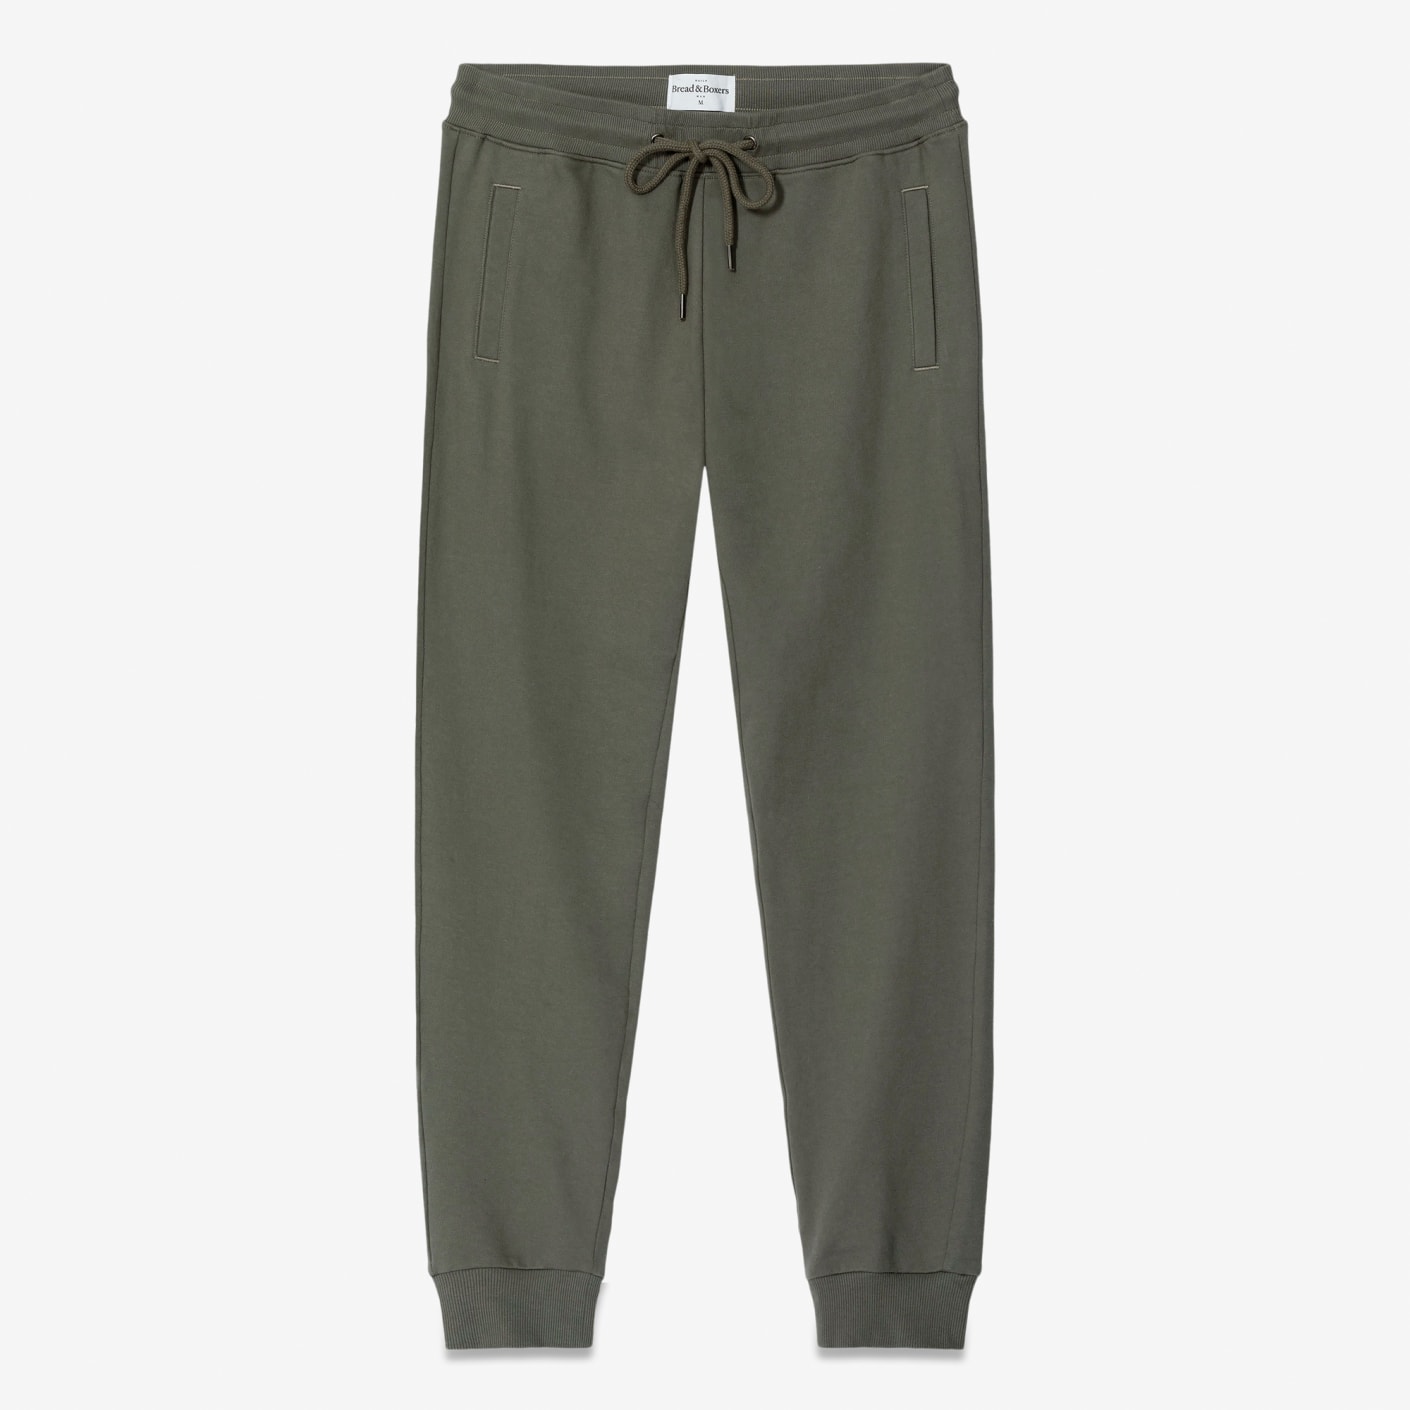 Bread & Boxers Lounge Pant – Olive Green | Bespoke Post